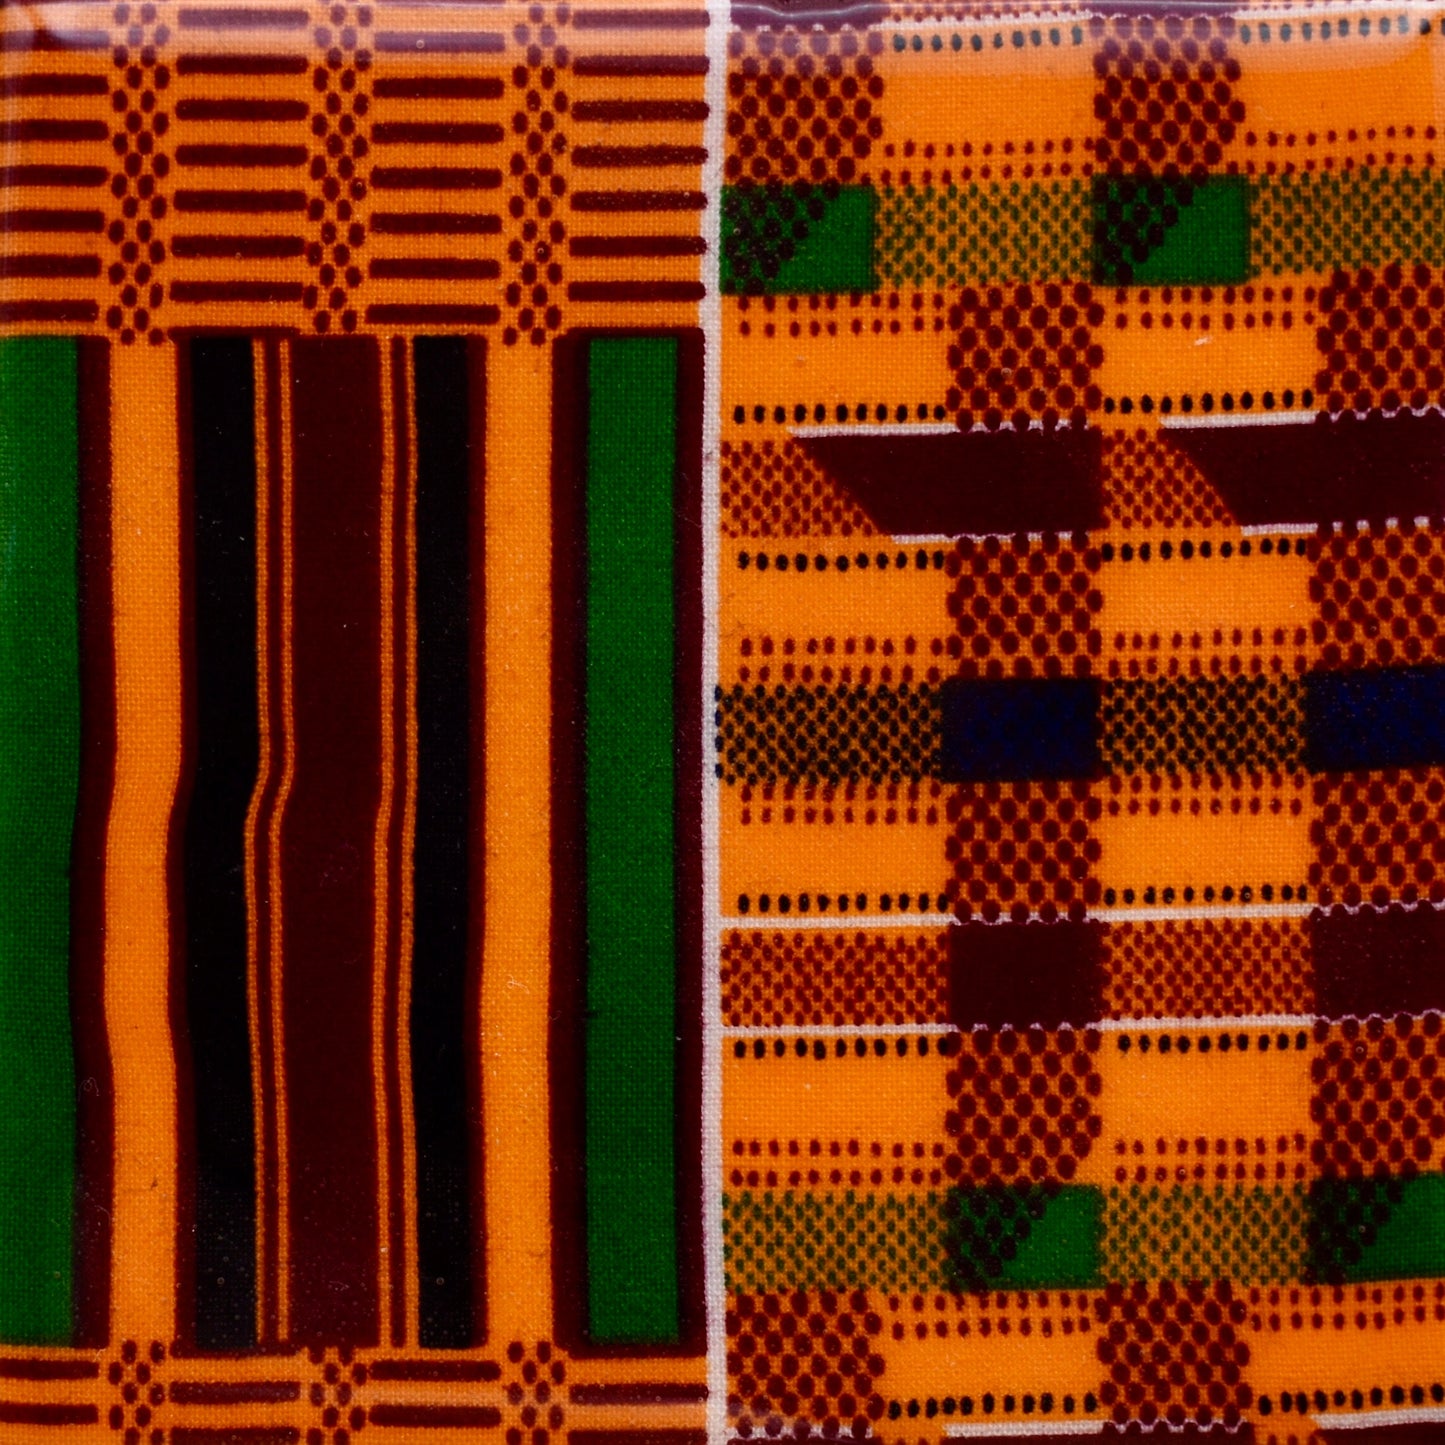 Kente Mom's Gift - Afrocentric Gift - Personalized Coasters - Presents for Mom - Unique Mom Day Gift Idea - Gift for Wife